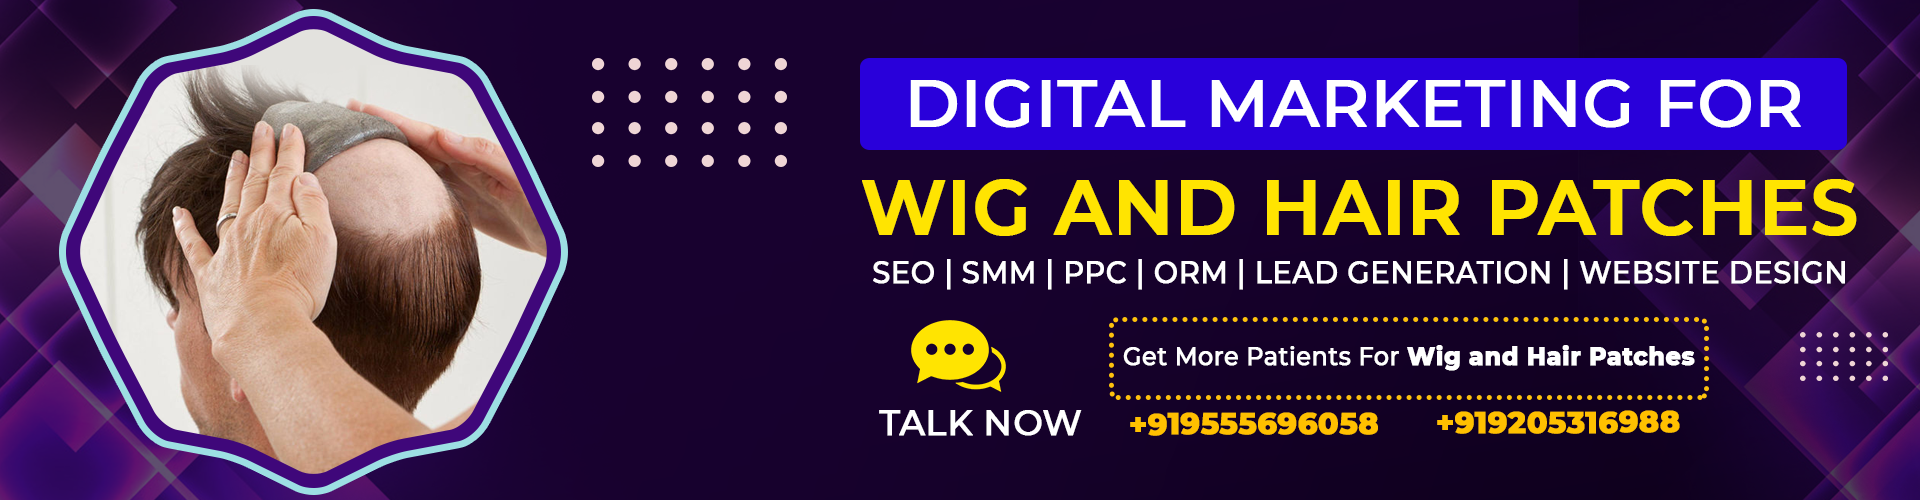 digital-marketing-for-wig-and-hair-patches